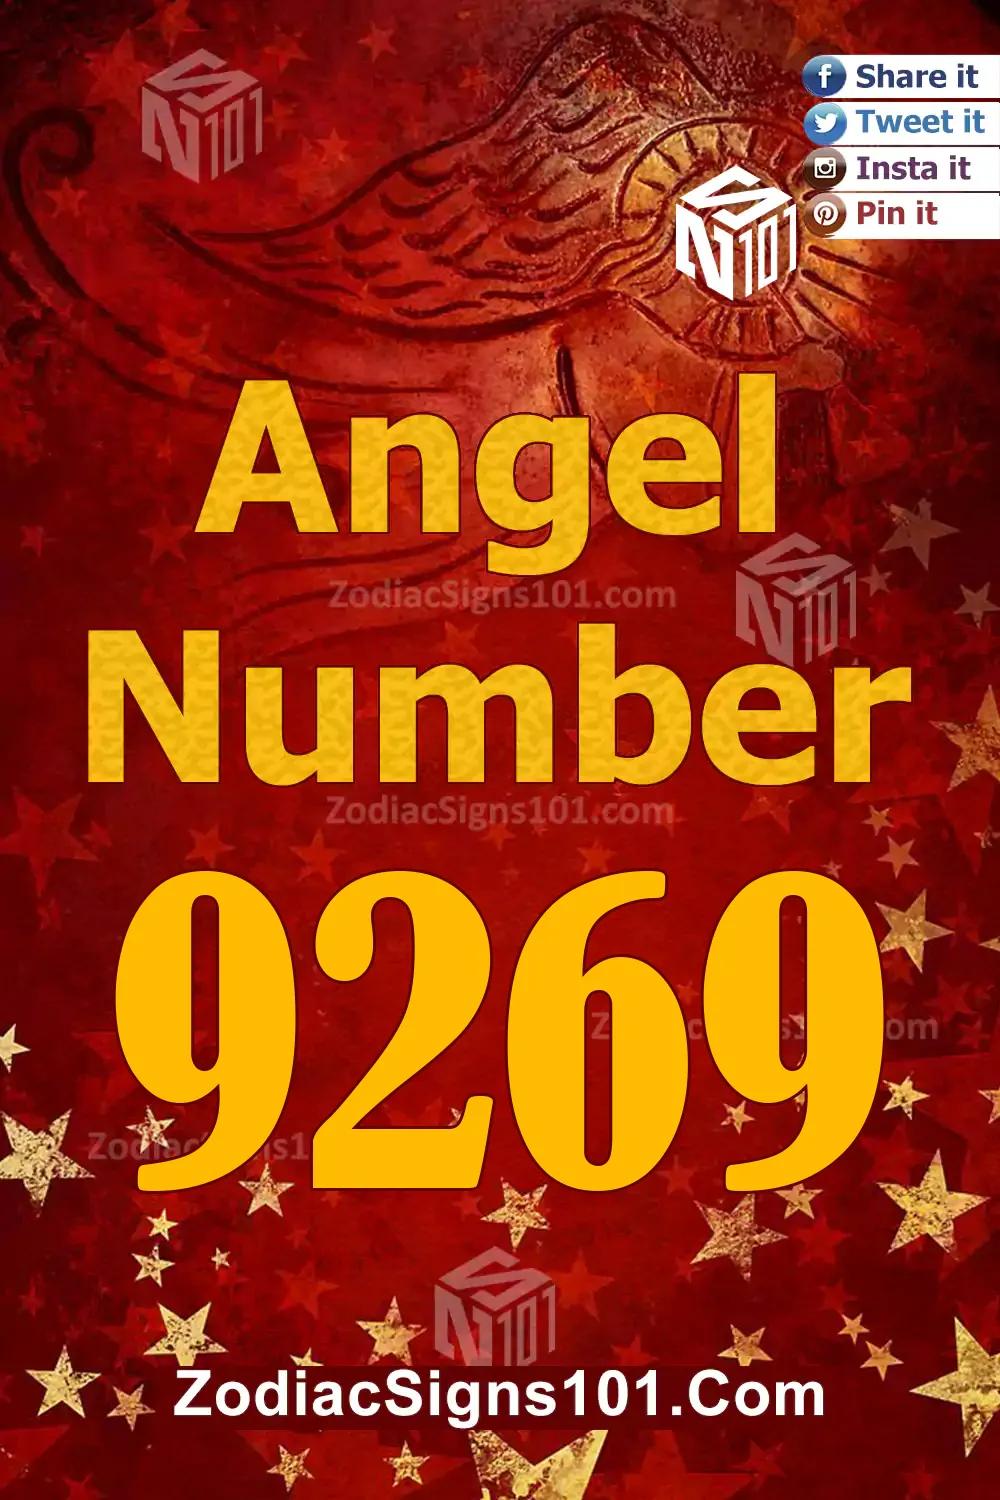 9269 Angel Number Meaning